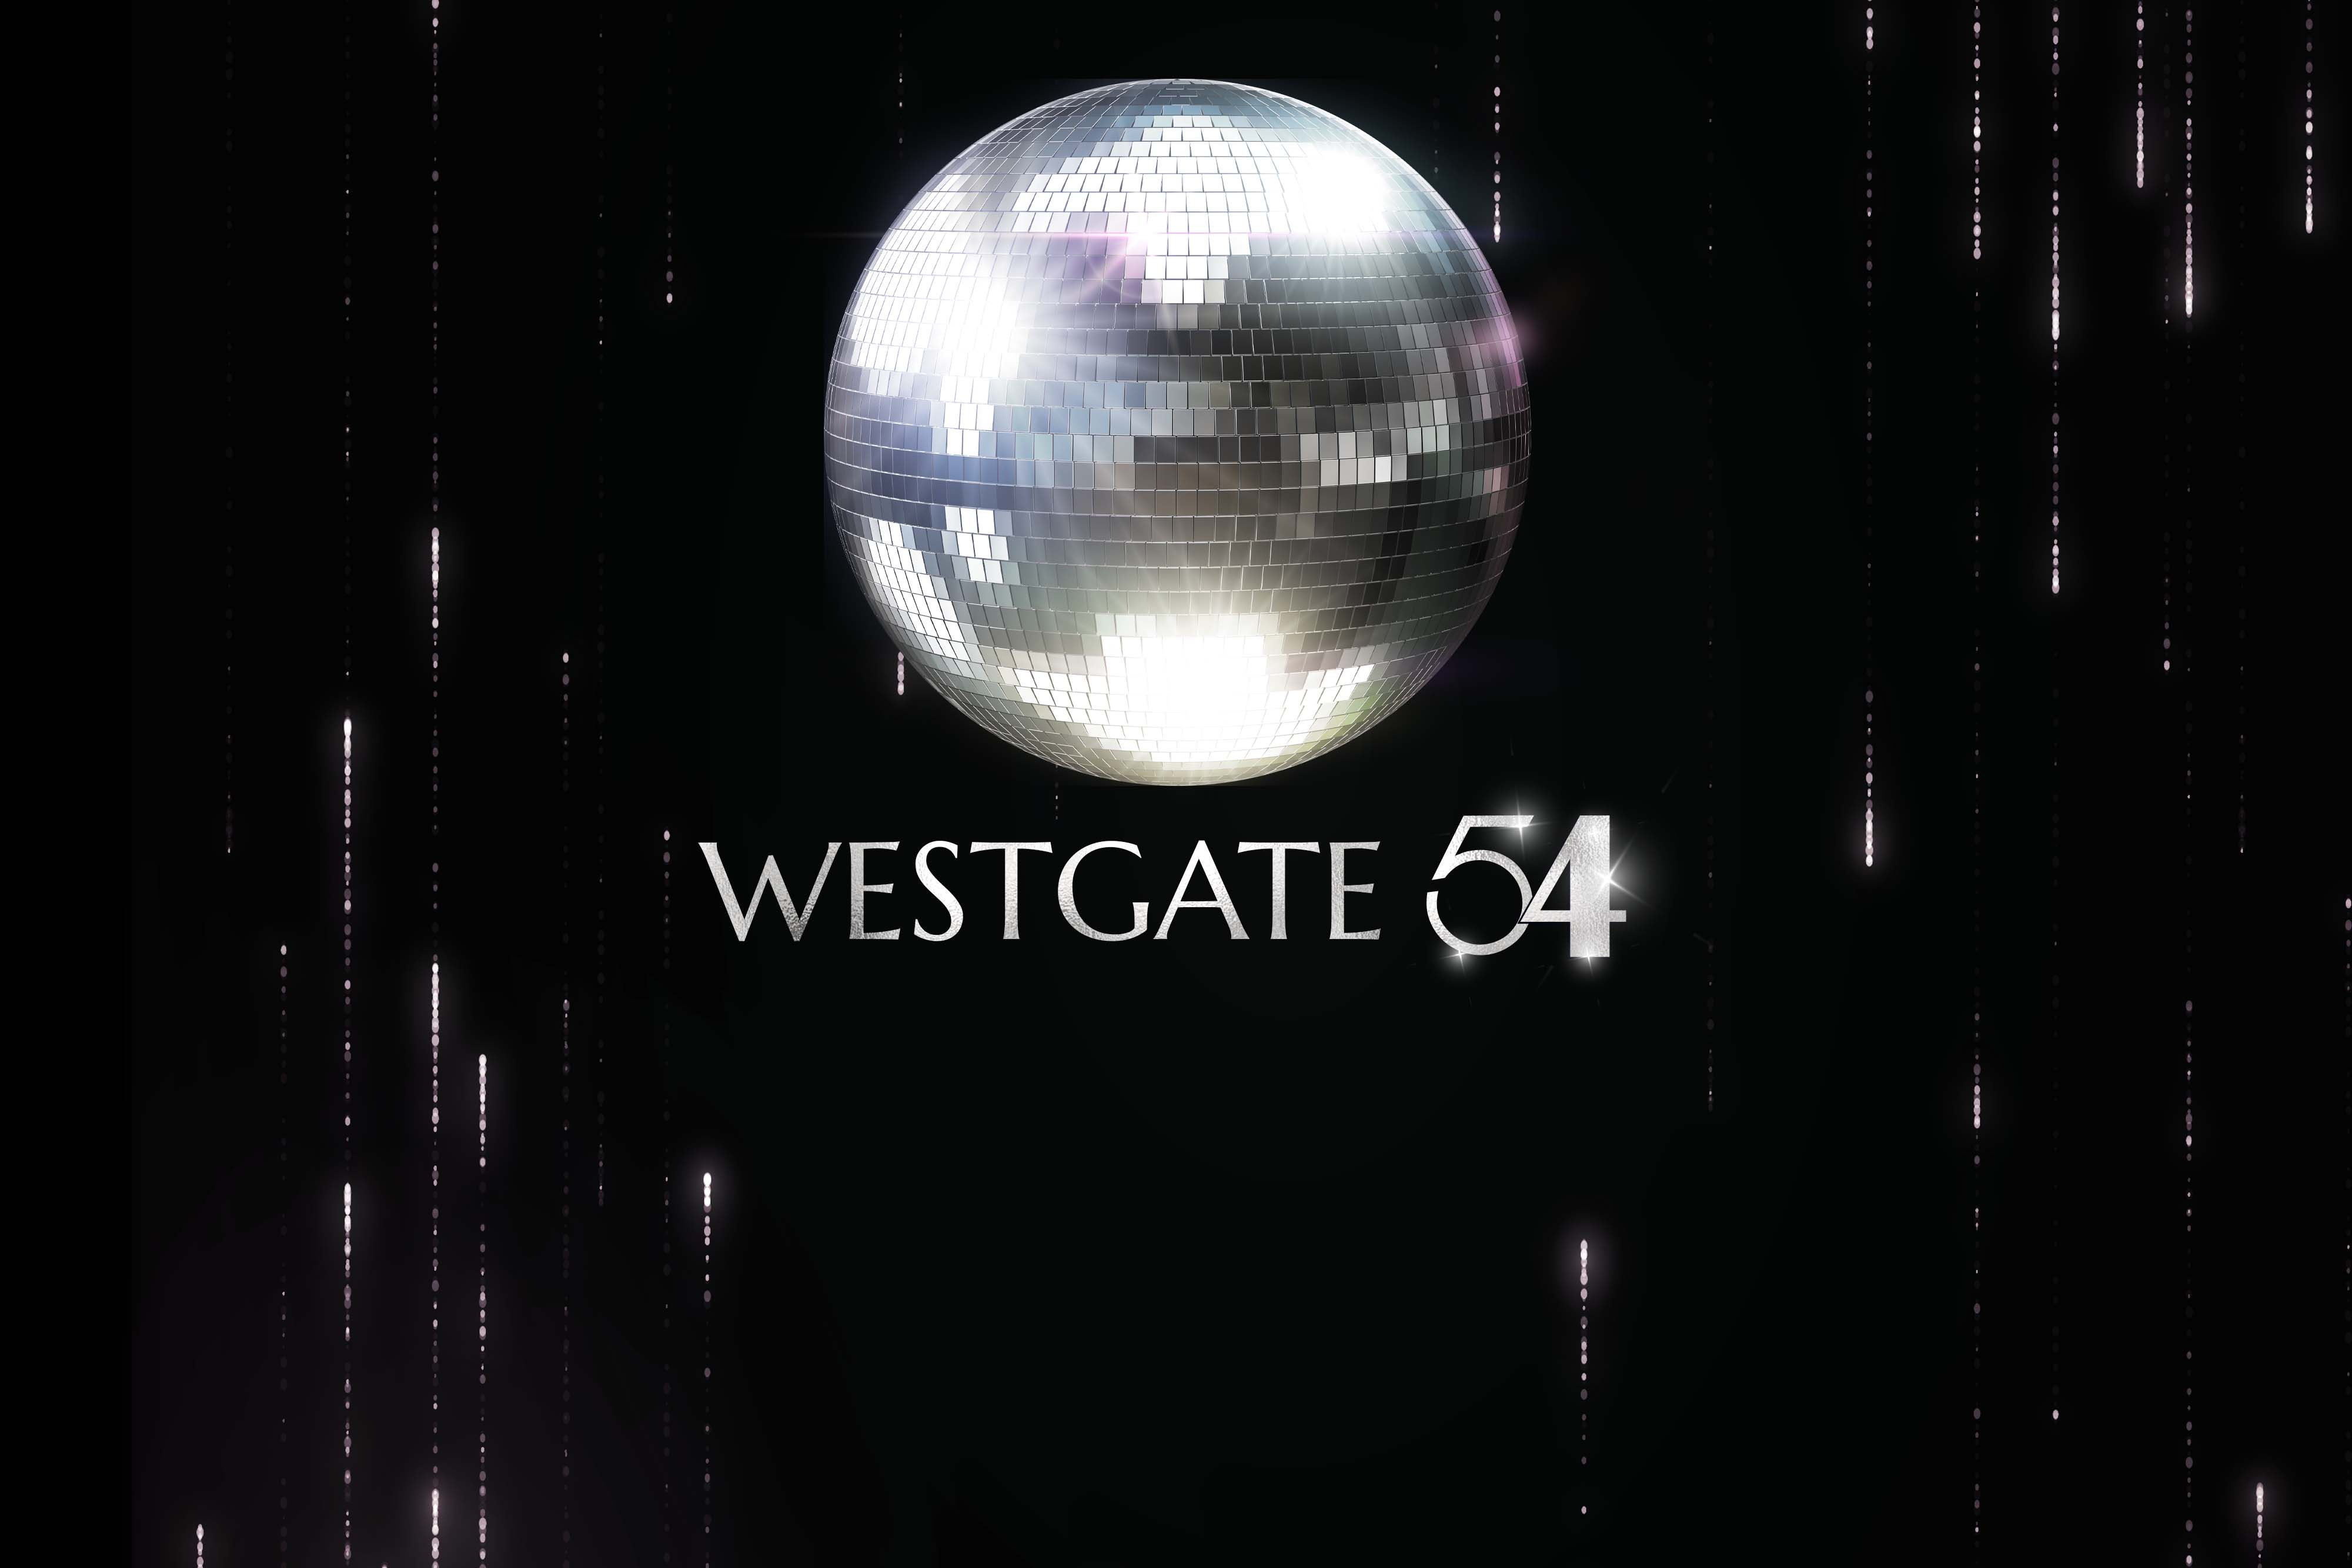 Las Vegas New Years Eve Vacation Package - Westgate 54 Discoball